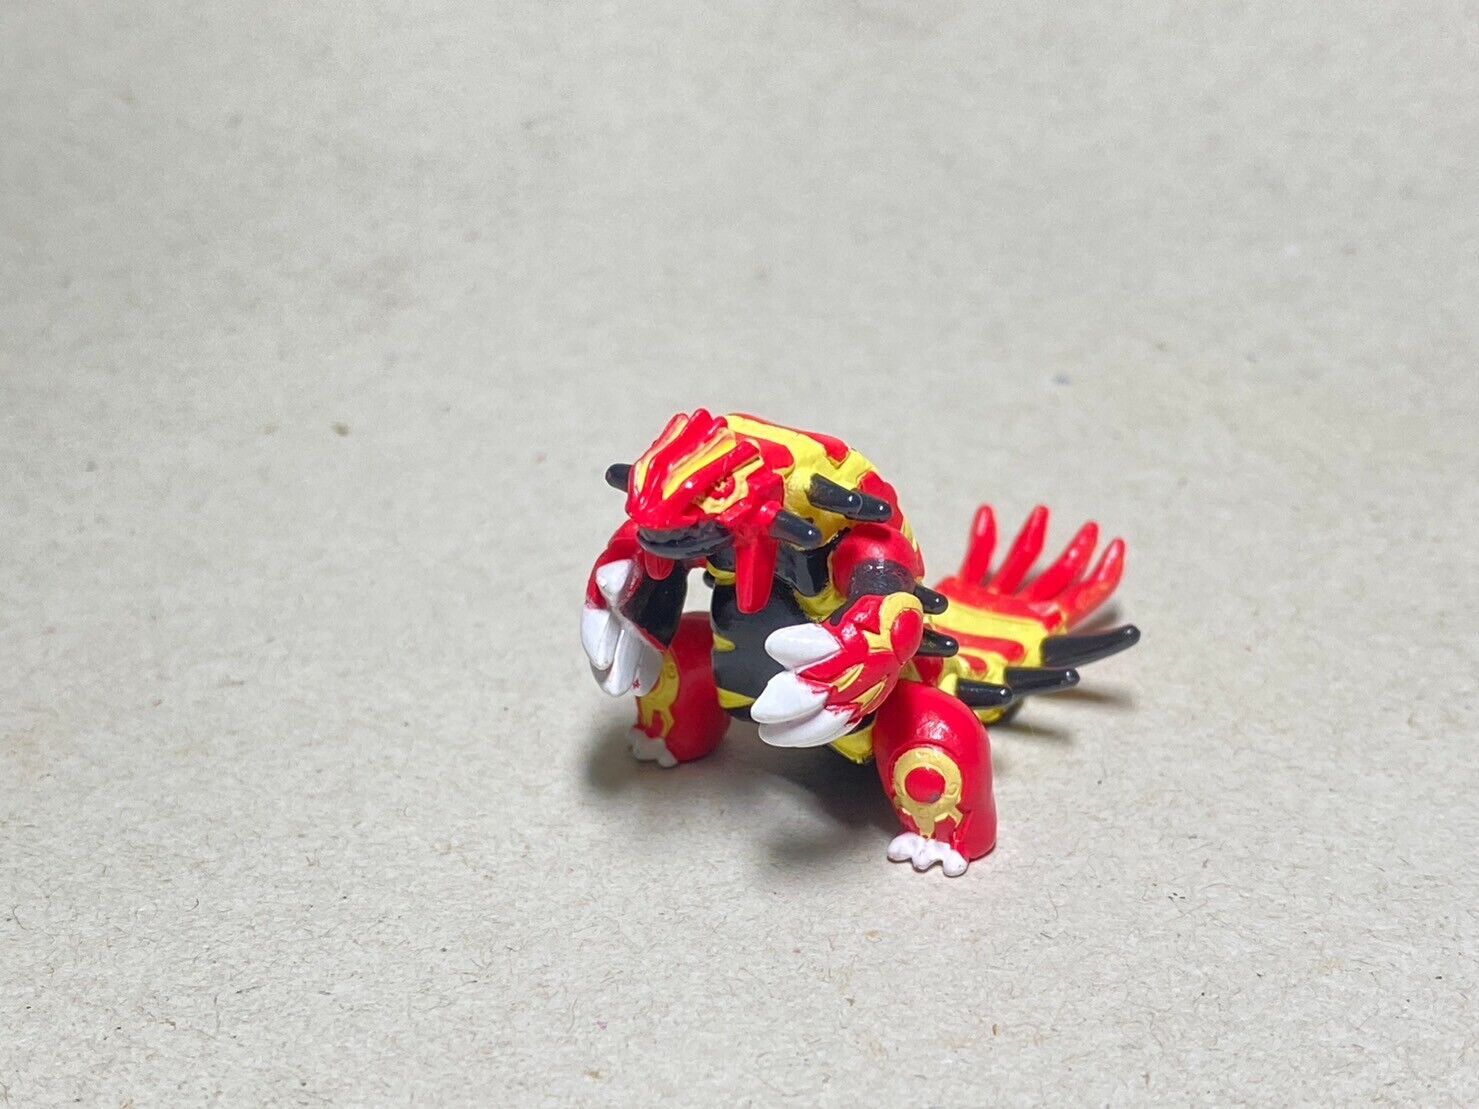 Primal Groudon A.1 Pokemon Monster Nintendo T-arts Get Collection Figure Toy.